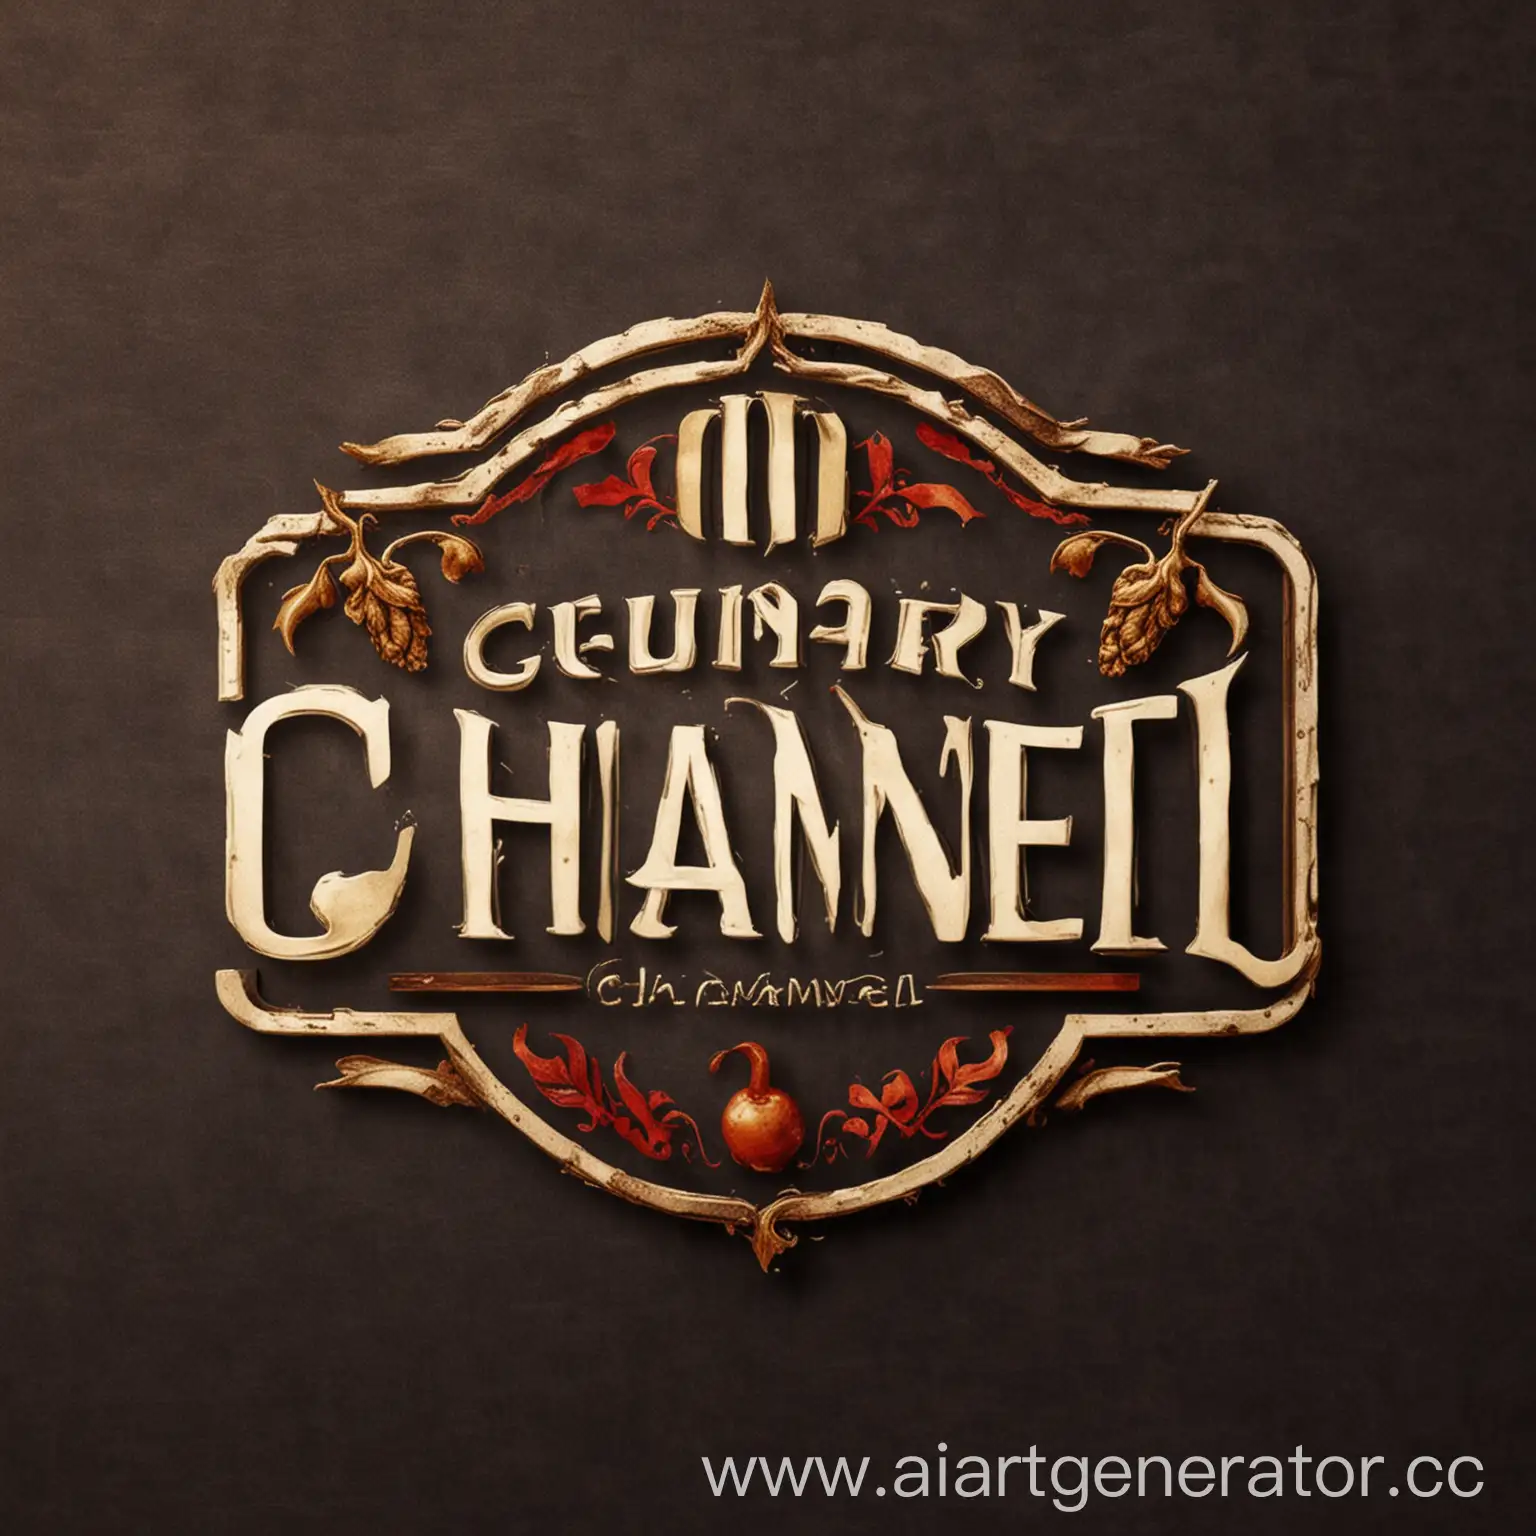 Vibrant-Culinary-Channel-Logo-Featuring-Chefs-Hat-and-Utensils